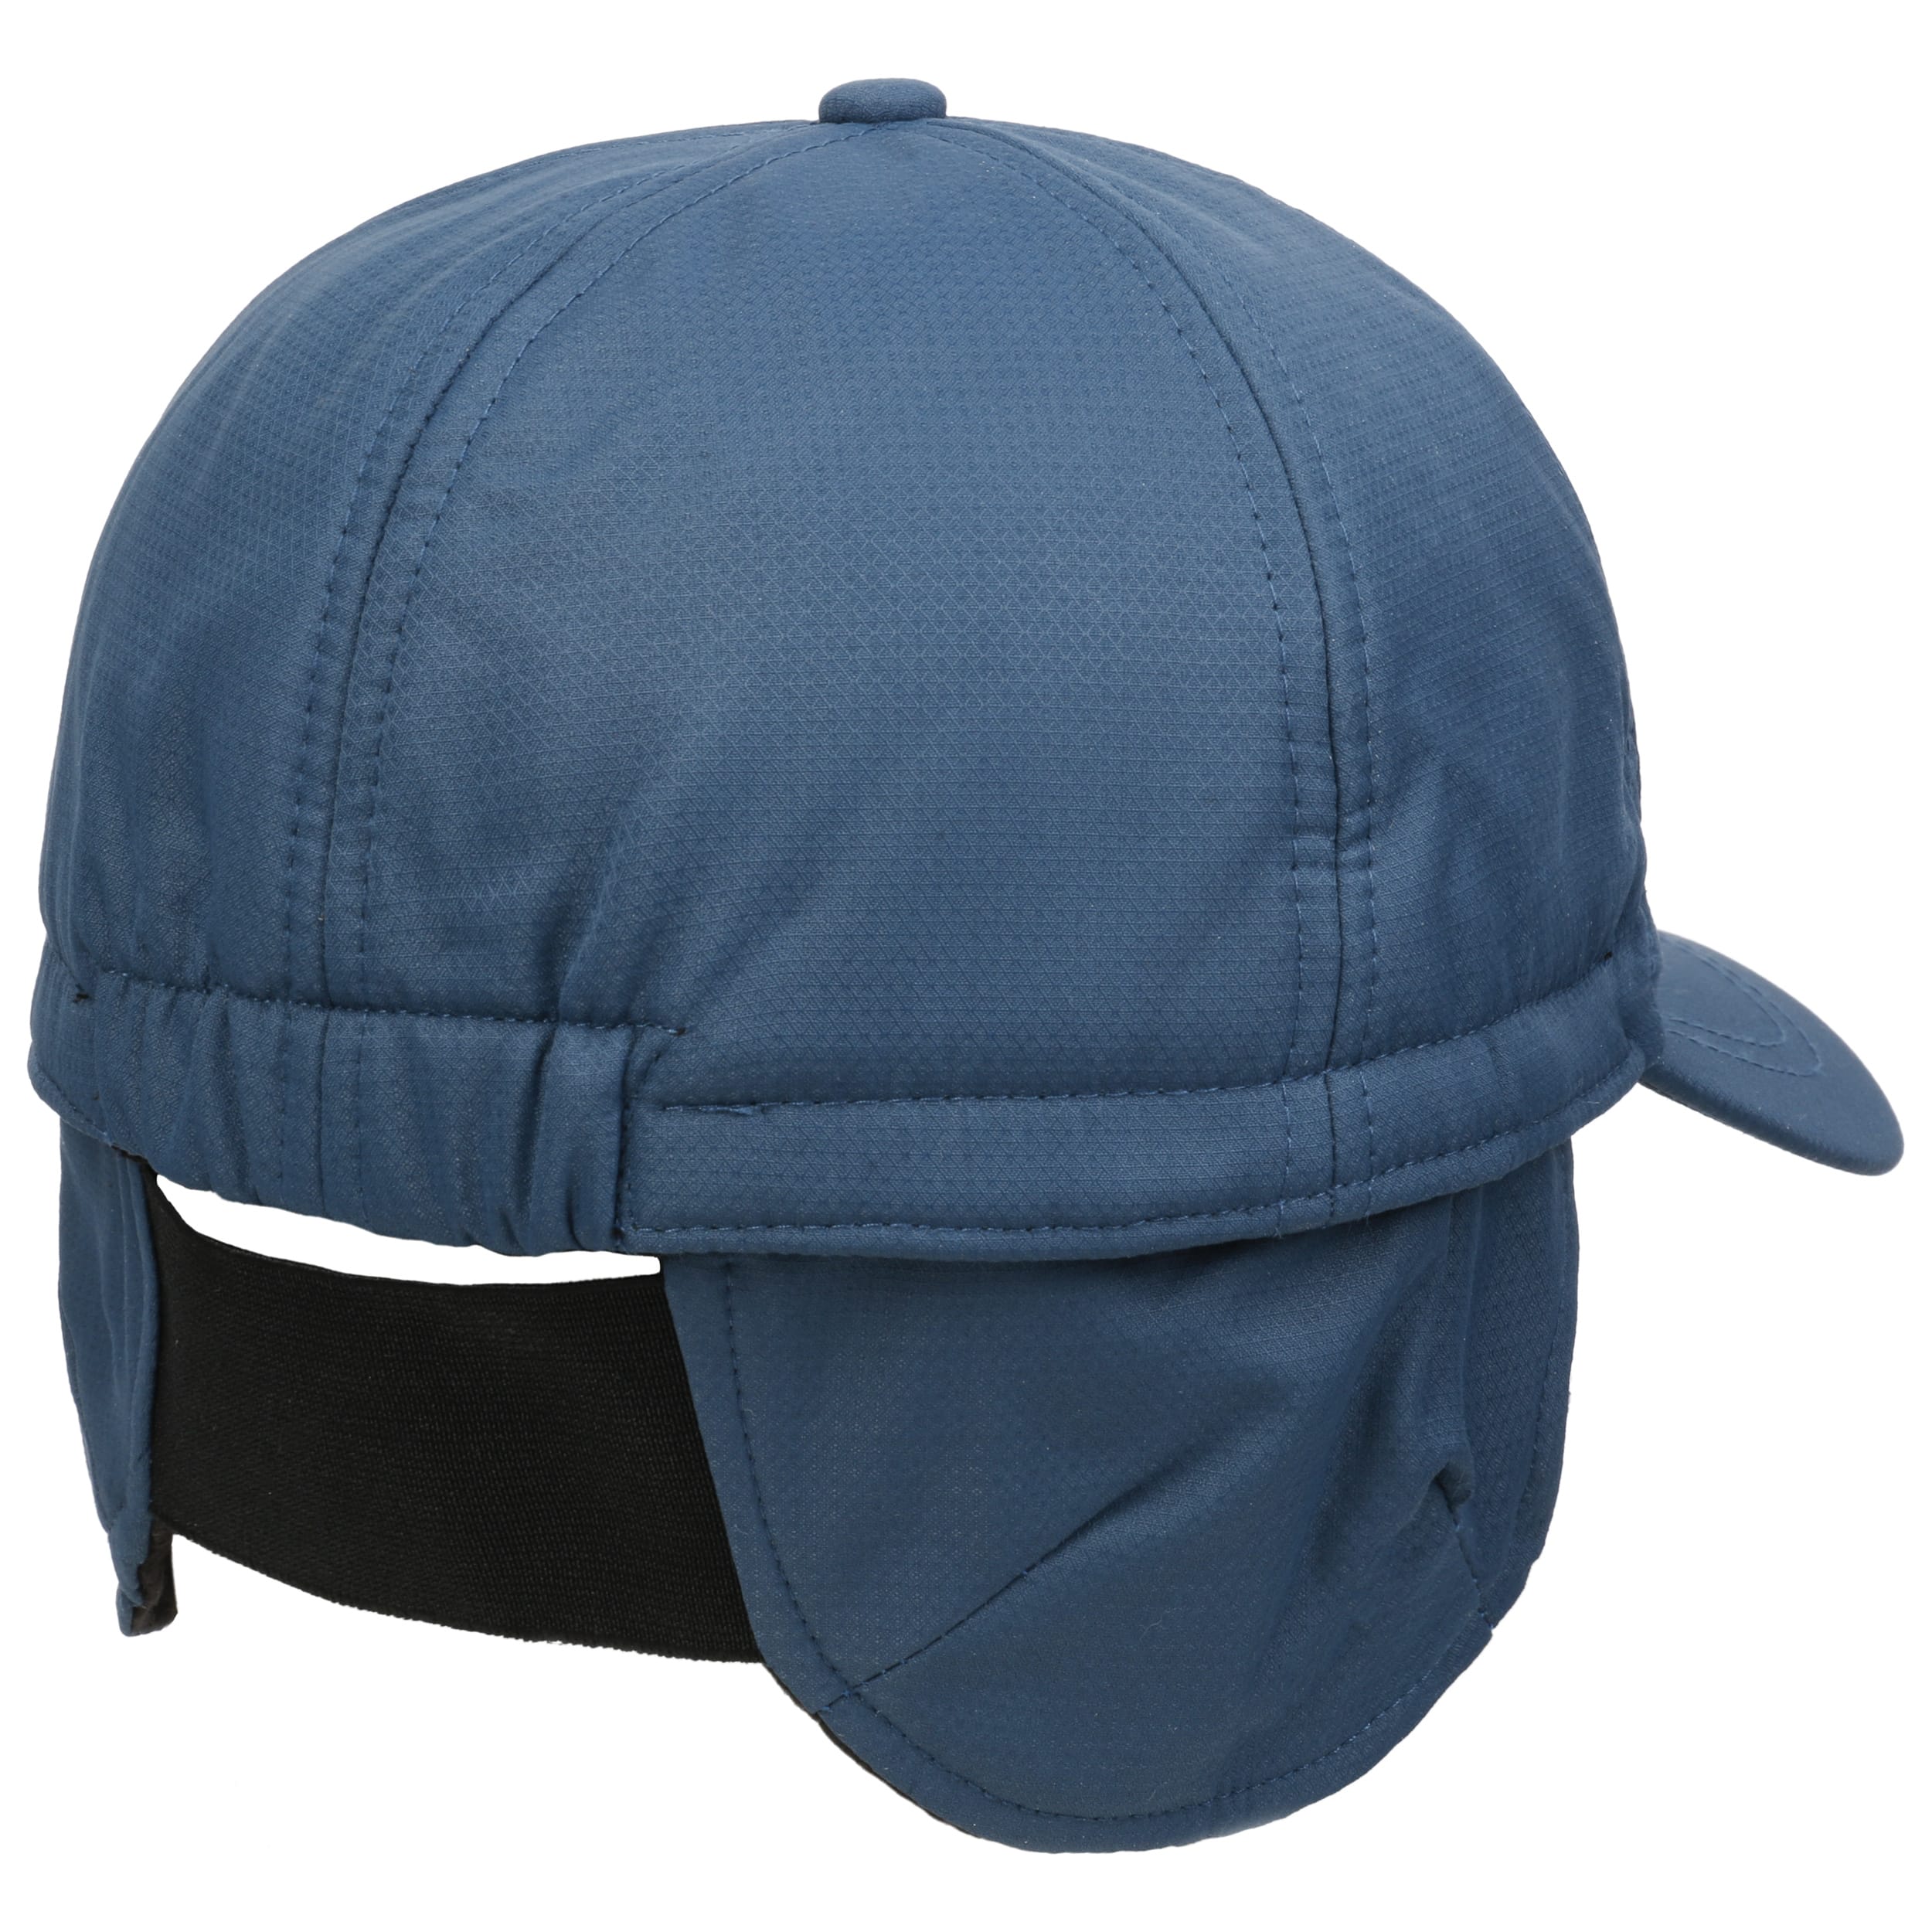 3M Thinsulate Cap with Ear Flaps by Lipodo - 32,95